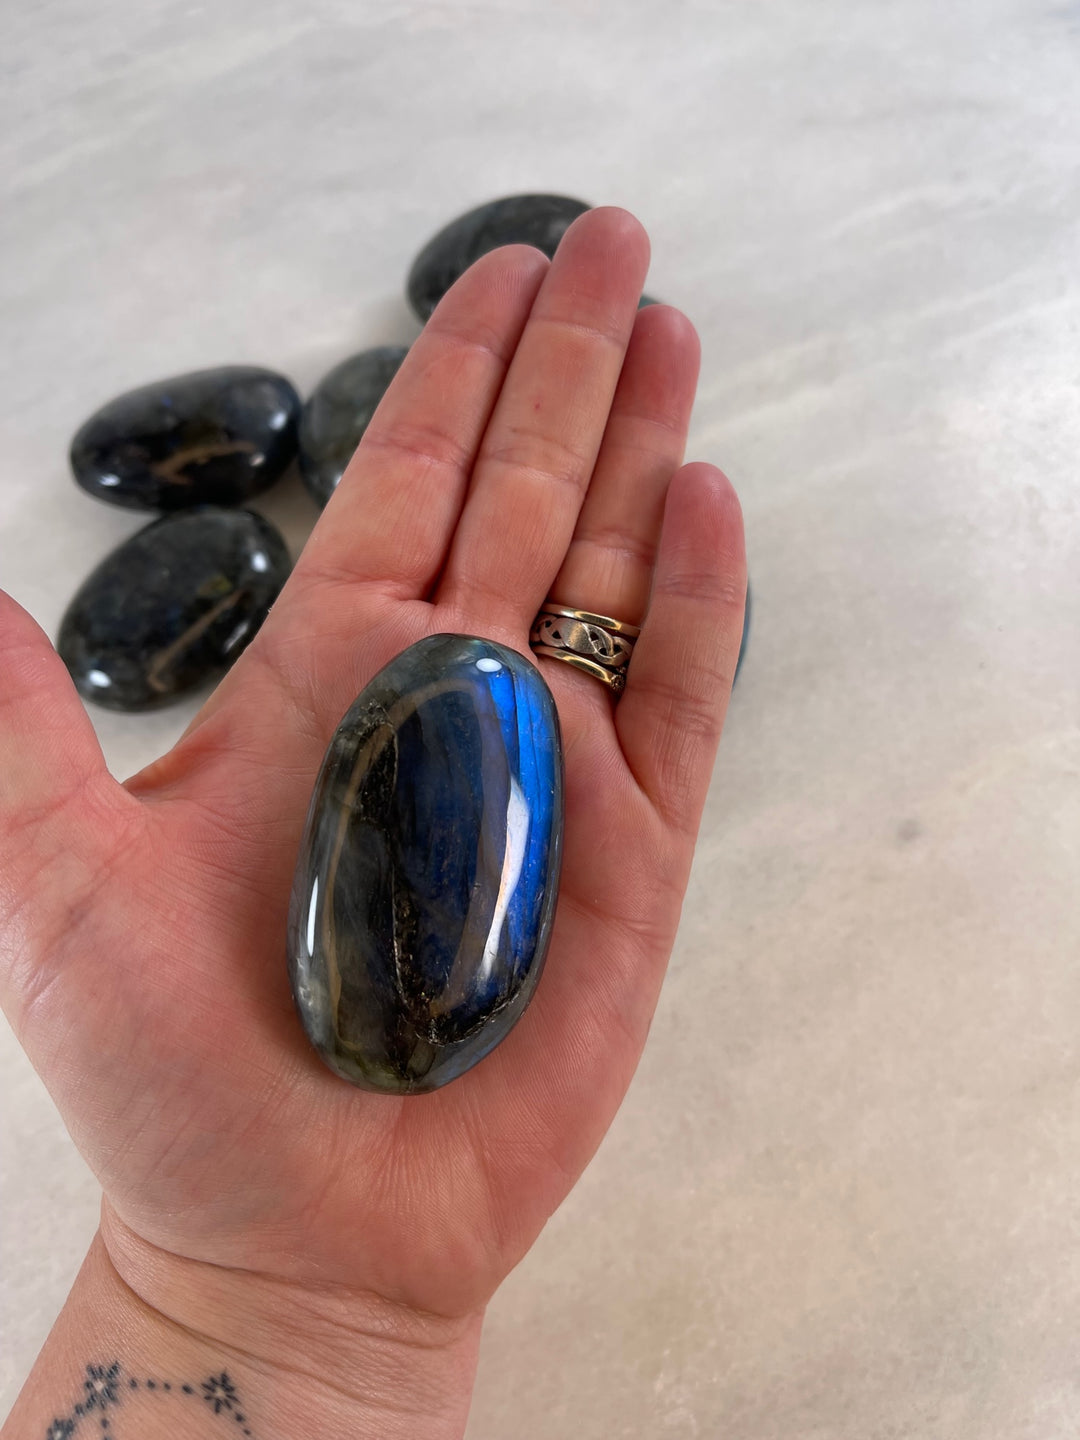 Labradorite Palm Stone in the palm of a hand